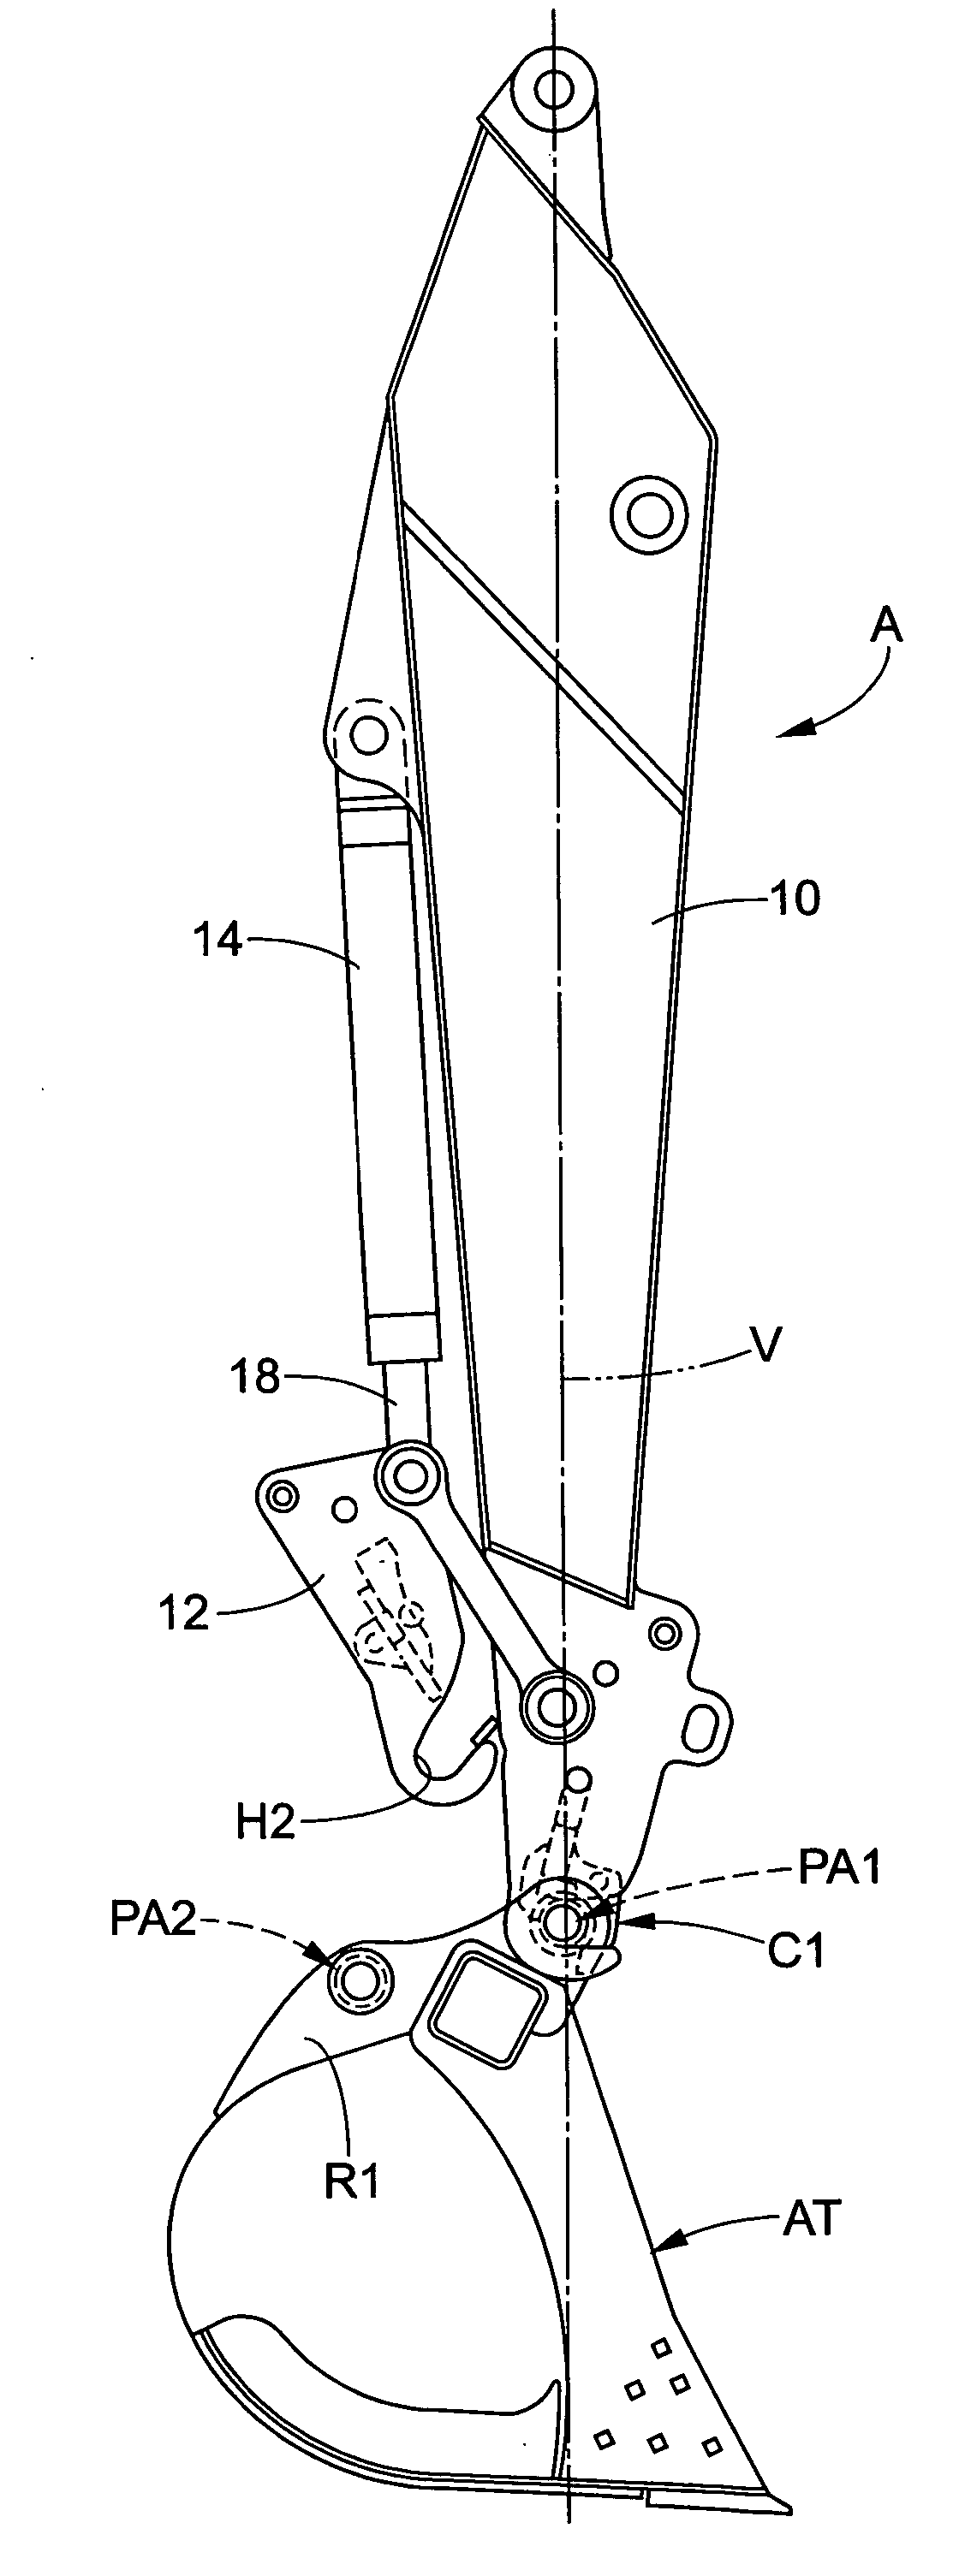 Arm assembly for excavation apparatus and method of using same